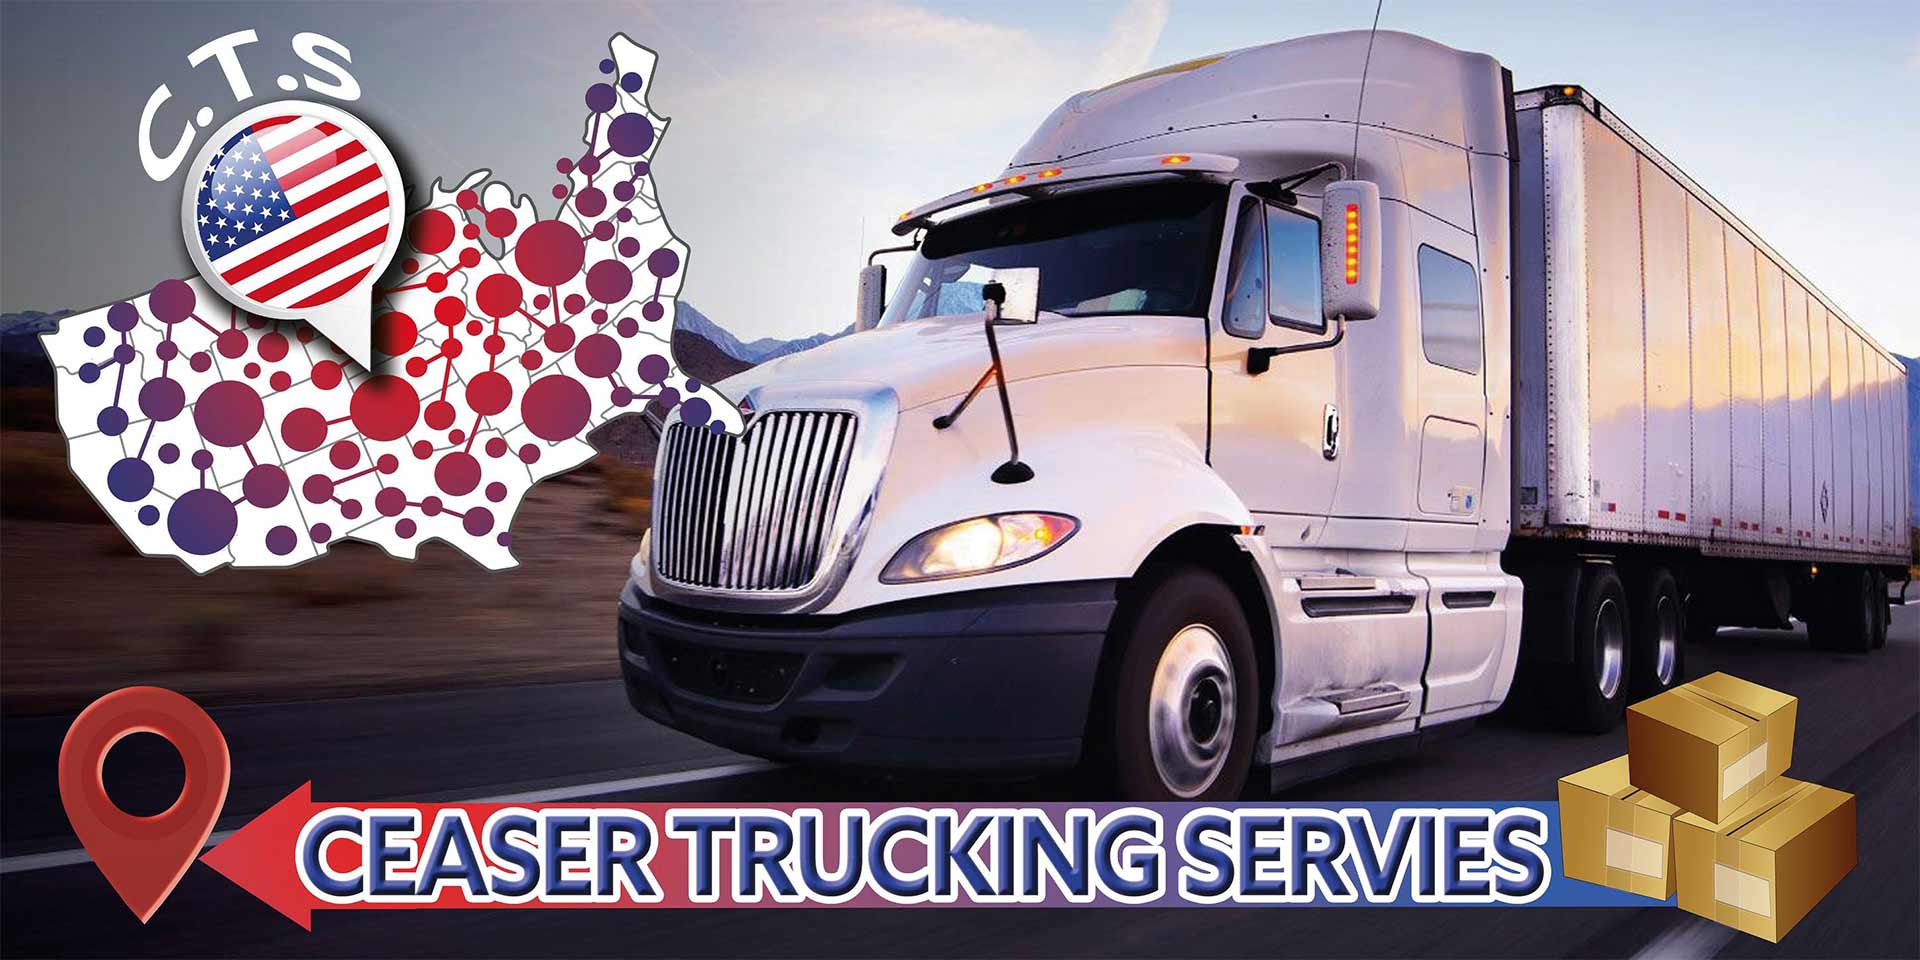 Flynn Trucking Services, Trucking Company and Freight Forwarding Services